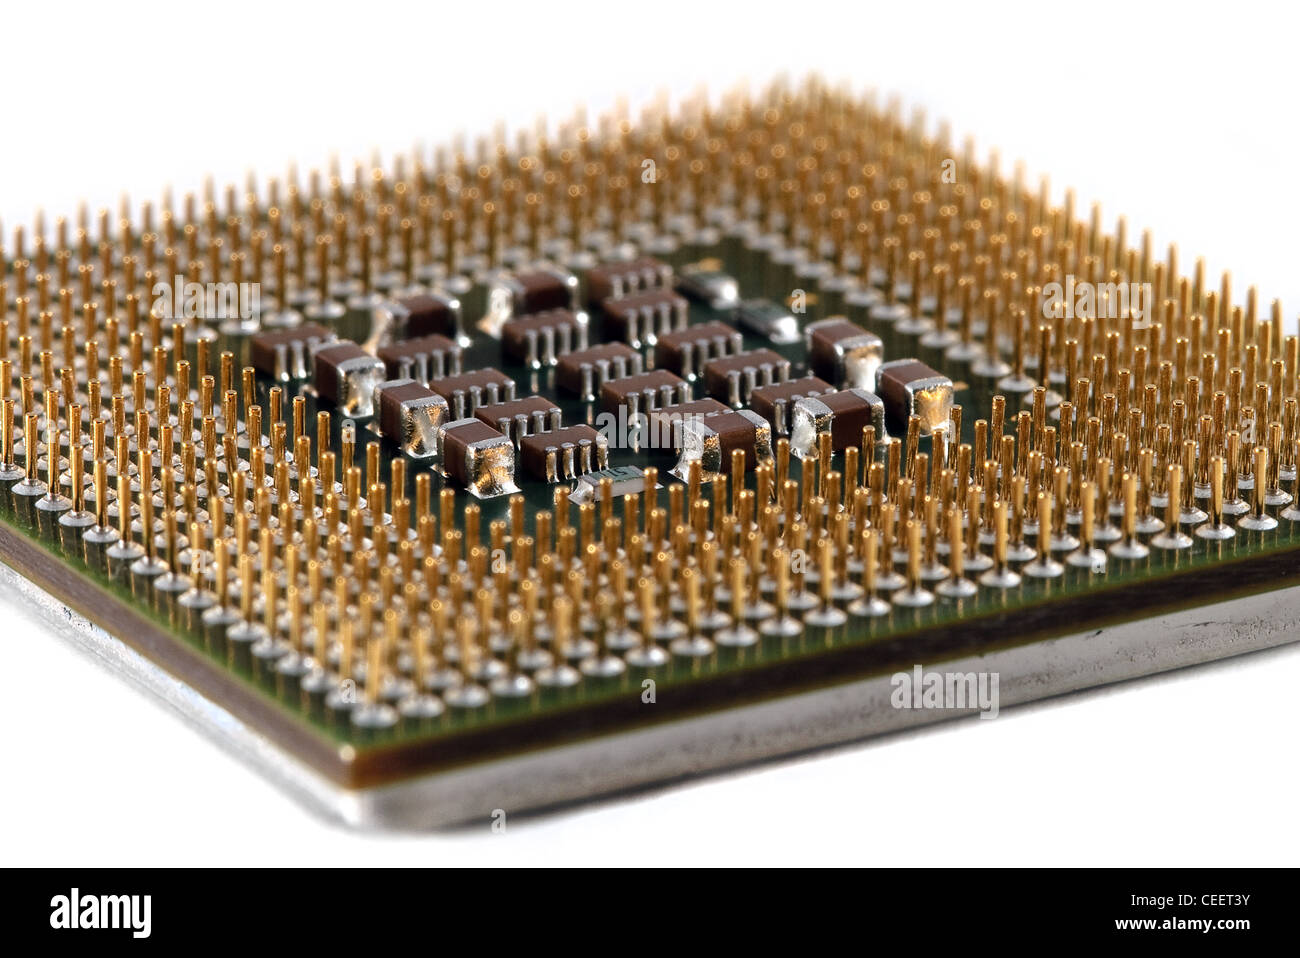 Central processor on white backgrounds Stock Photo